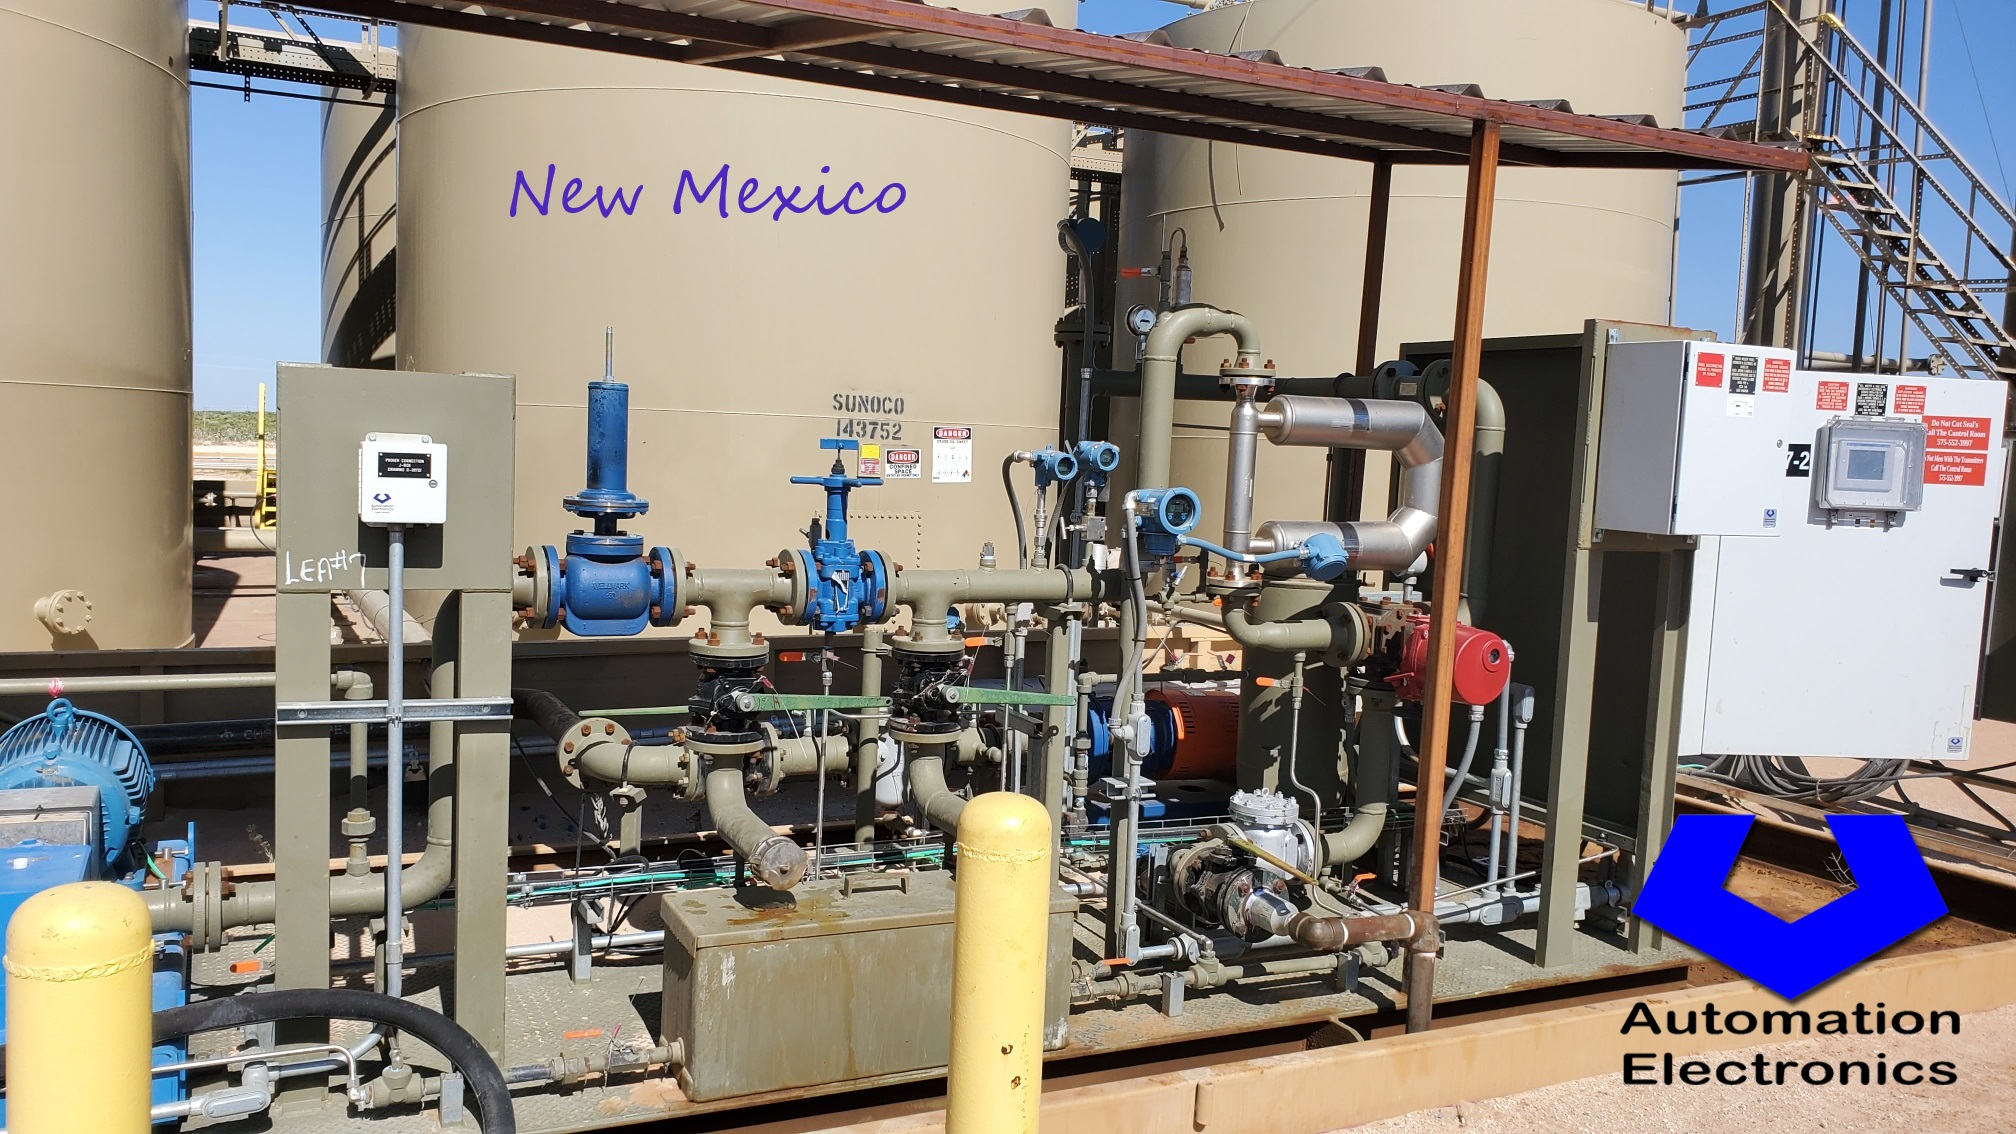 Programming updates in New Mexico by Automation and Electronics, Inc. personnel.